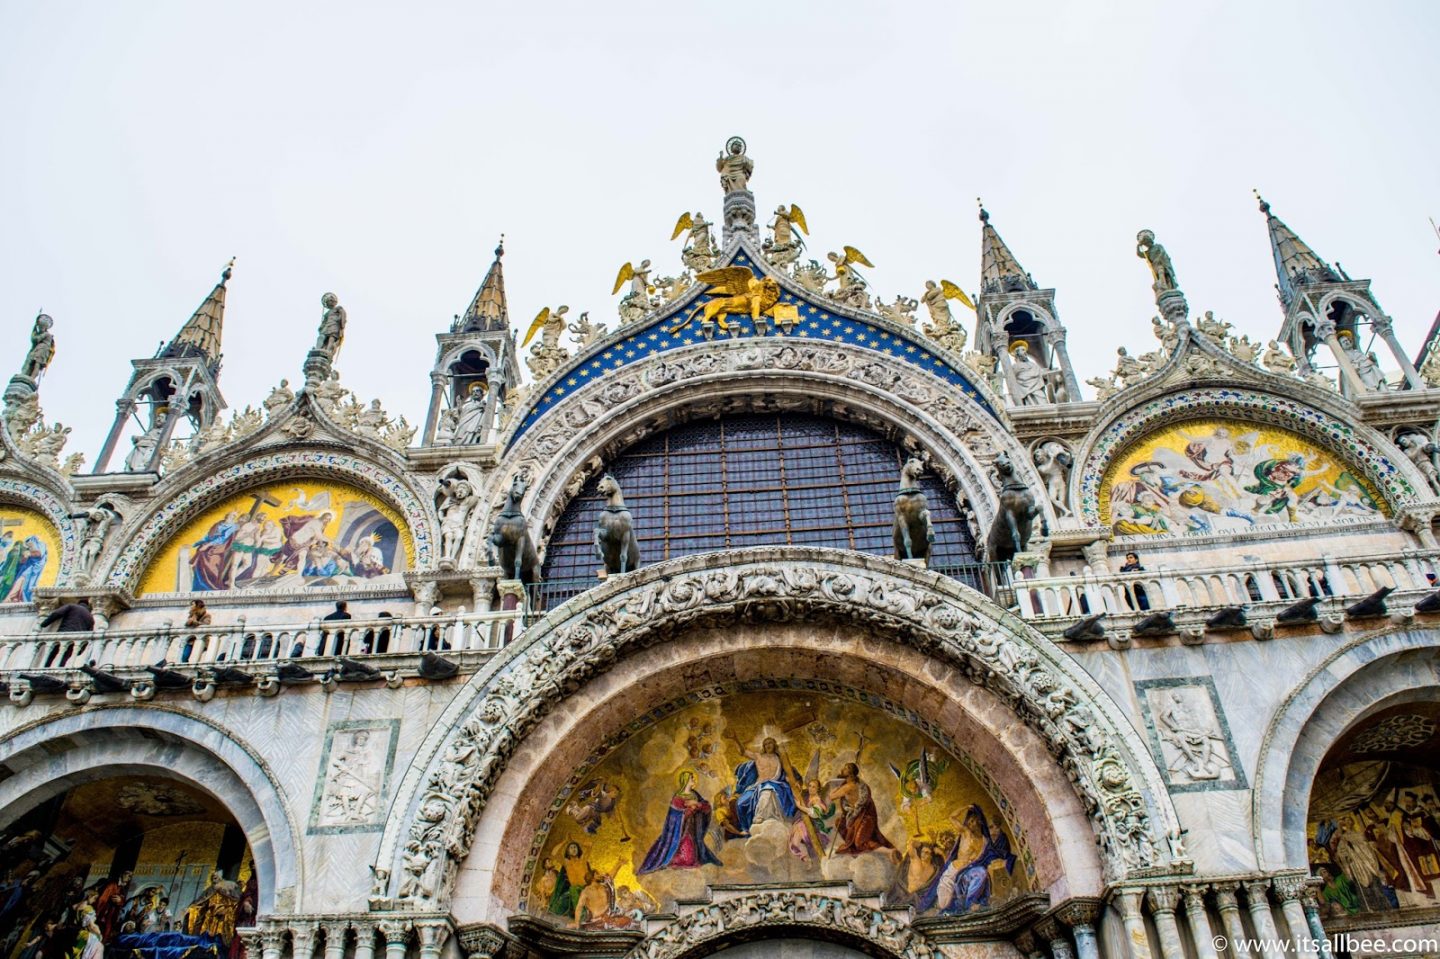  Venice in 2 Days - A Perfect Itinerary - is 2 nights in venice enough